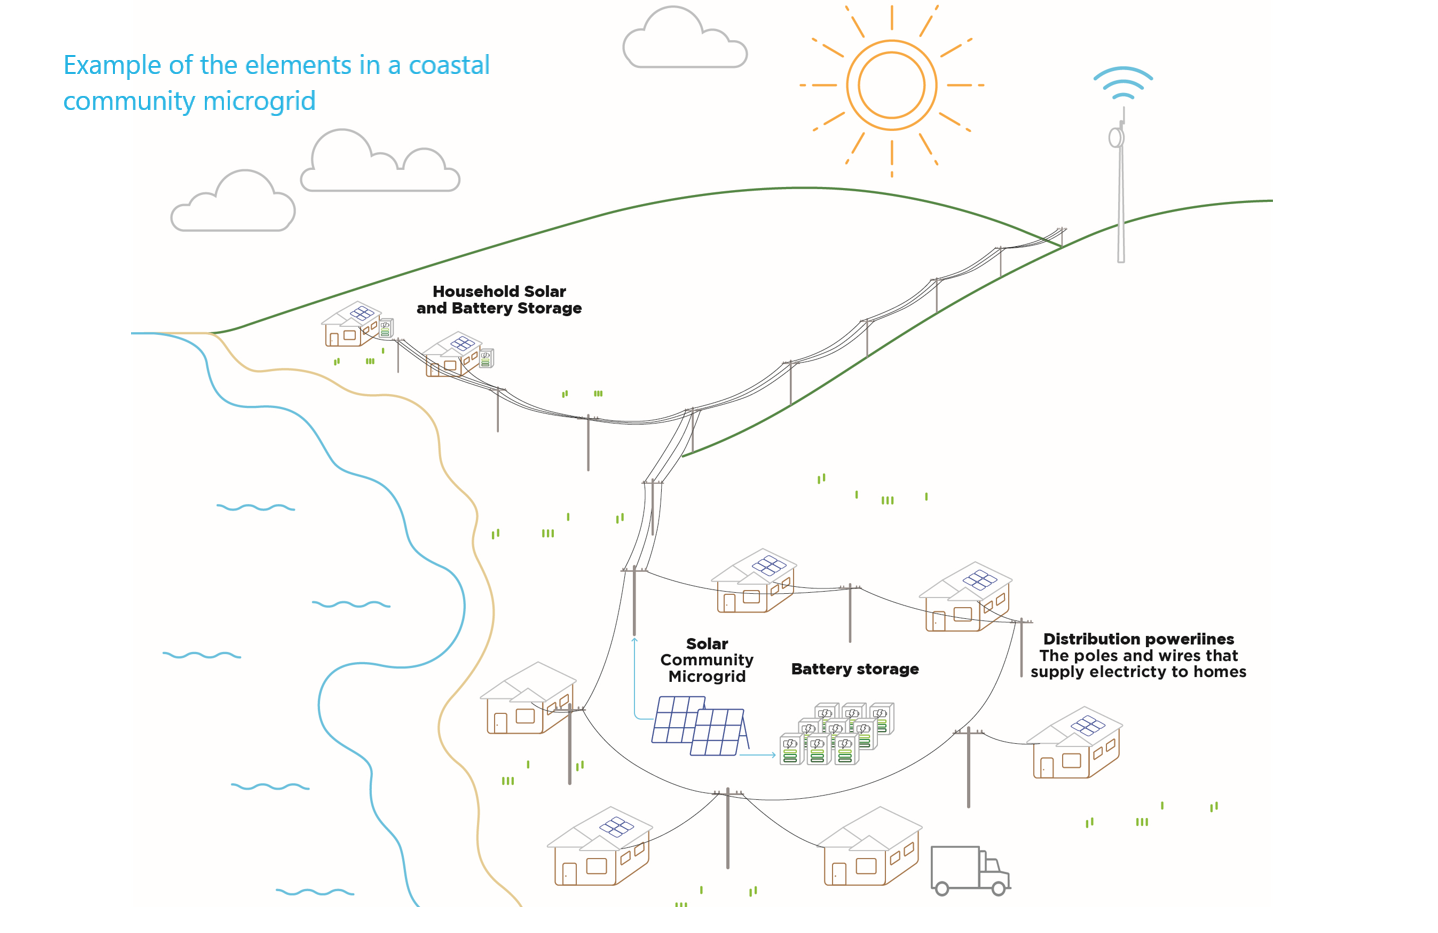 See our Community Microgrid Graphic